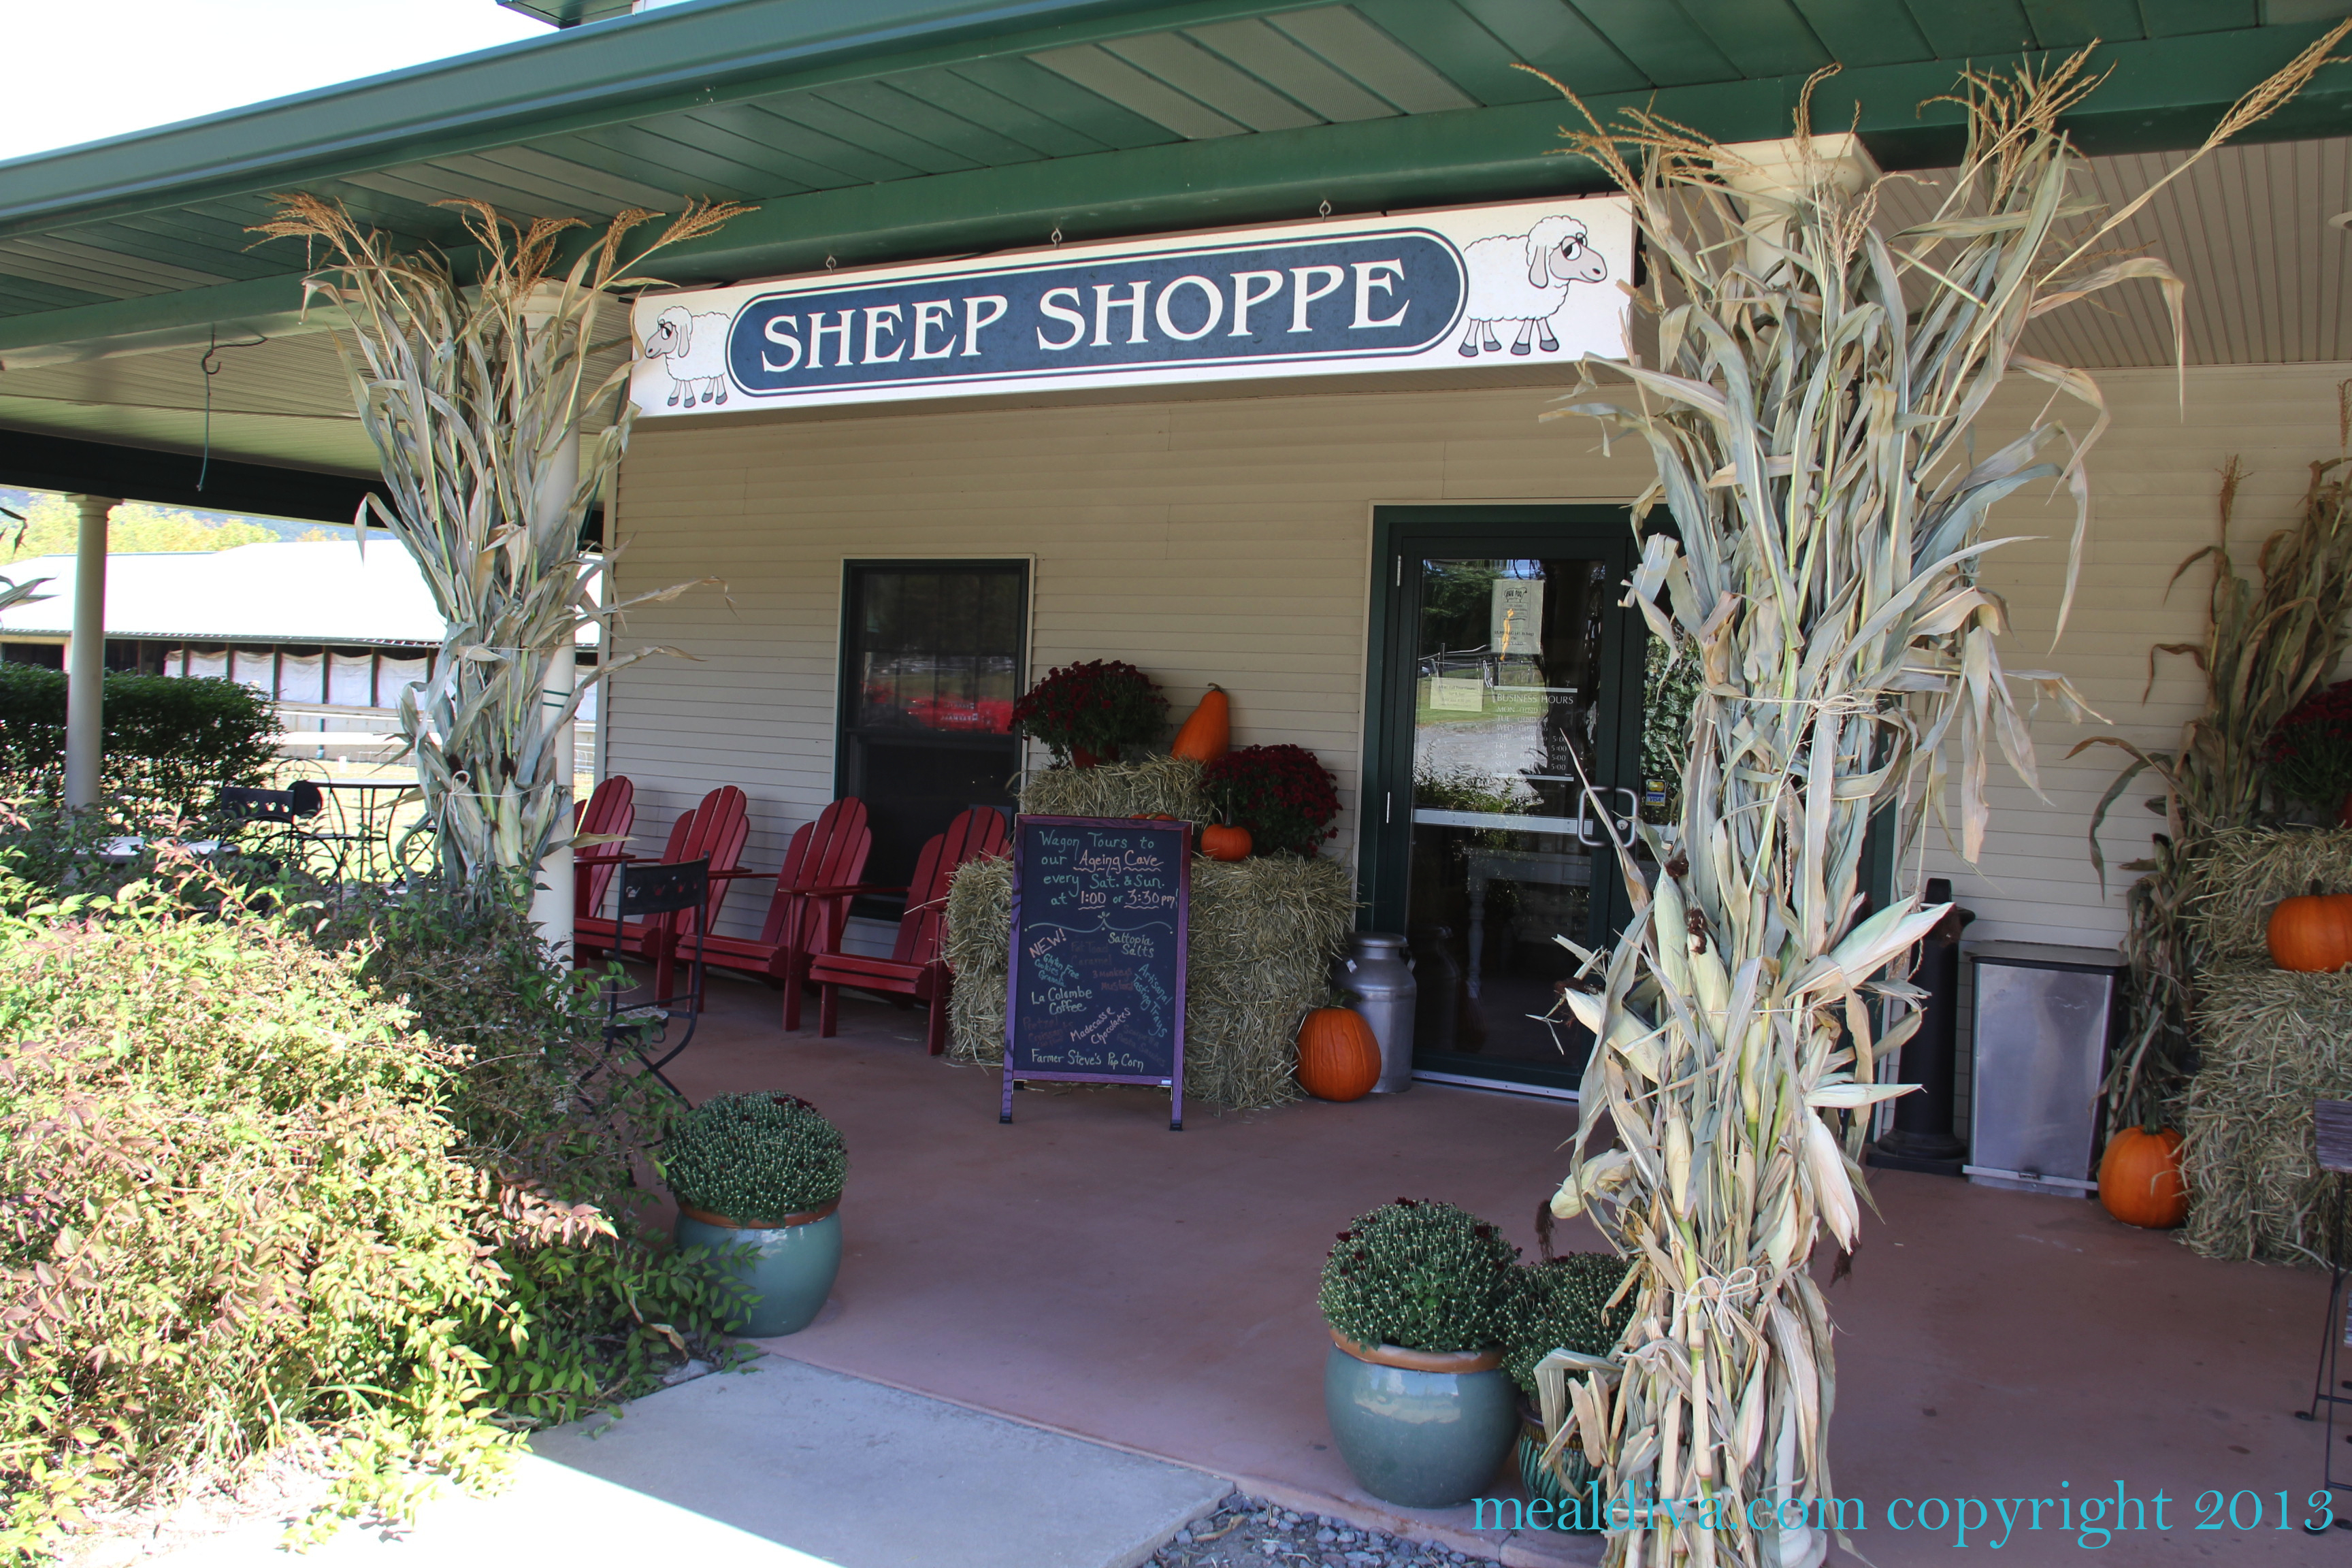 Be a “Gastronome” For The Day: Visit Valley Shepherd Creamery